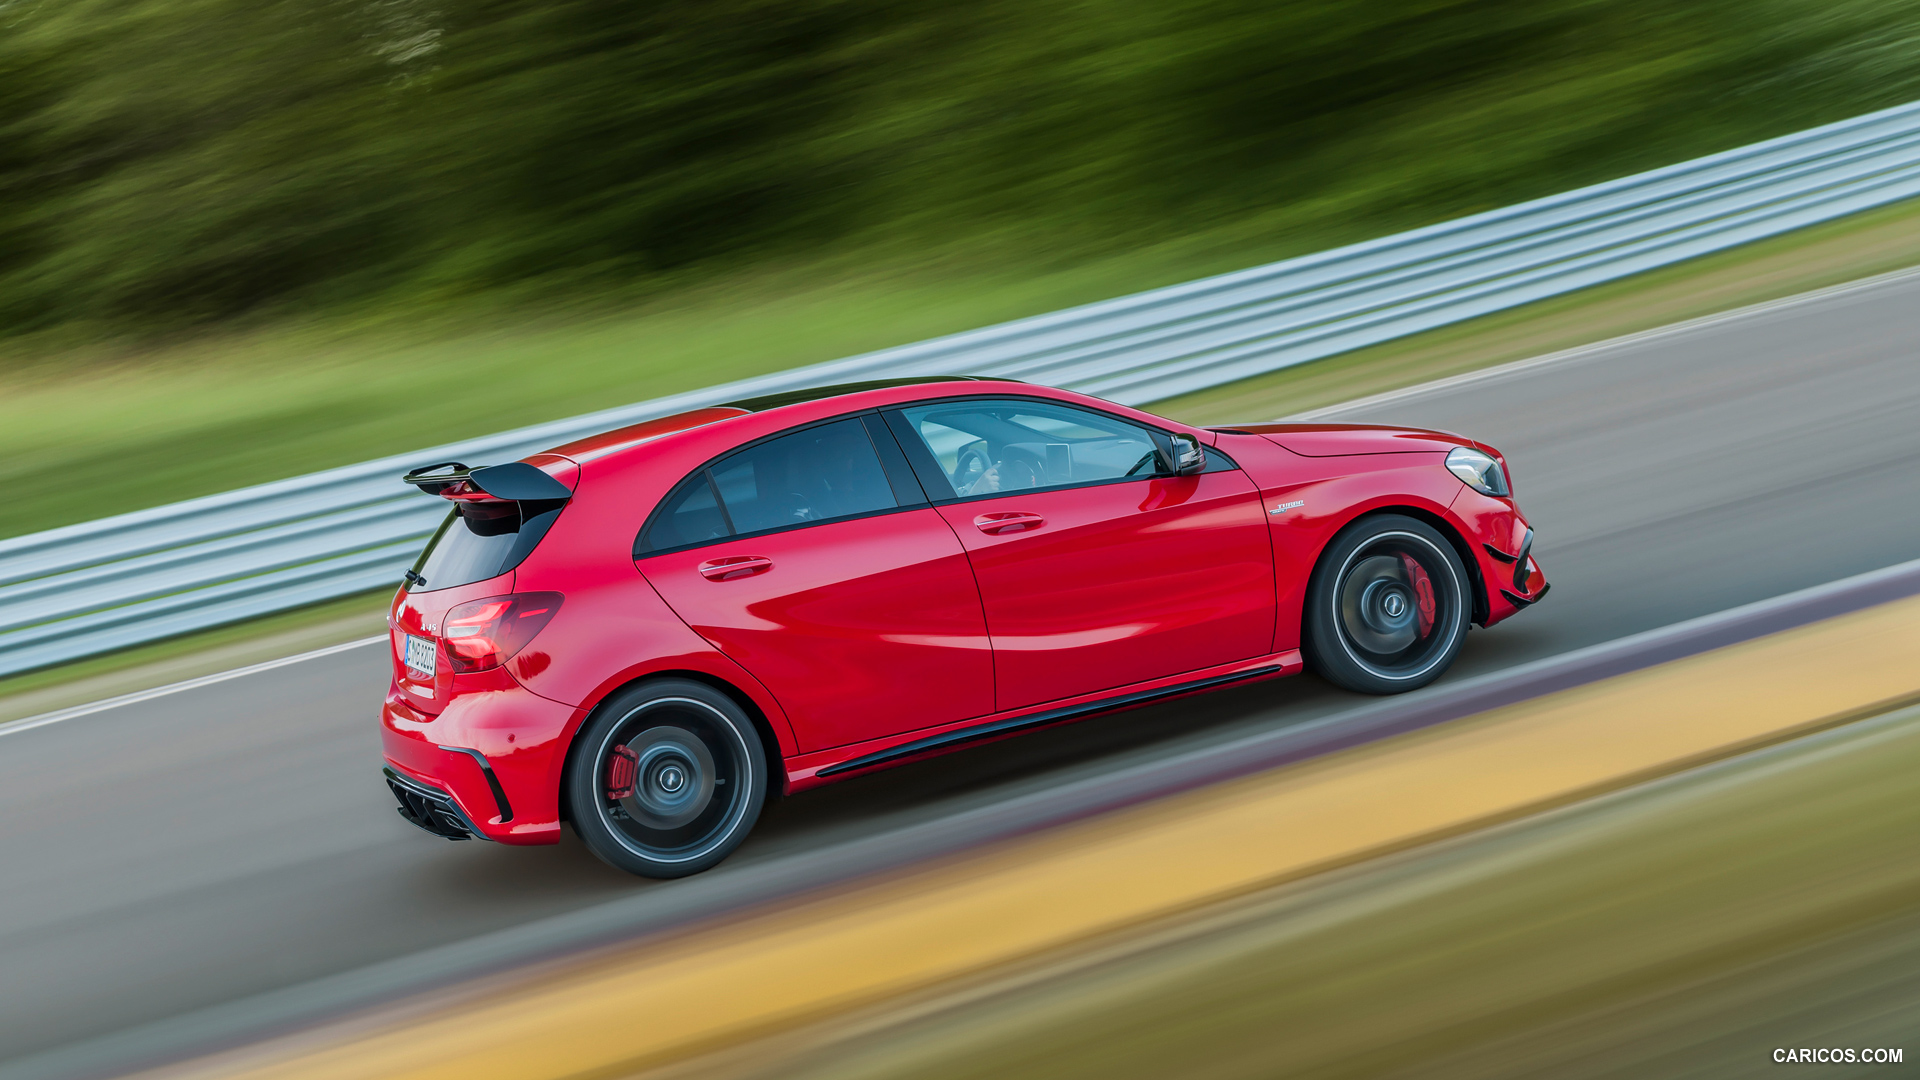 2016 Mercedes-AMG A45 AMG Exclusive (Jupiter Red) - Side, #13 of 15